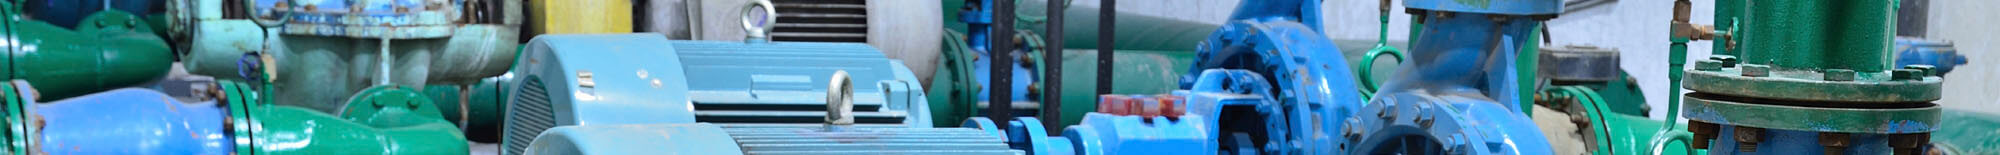 authorized fmc industrial pumps